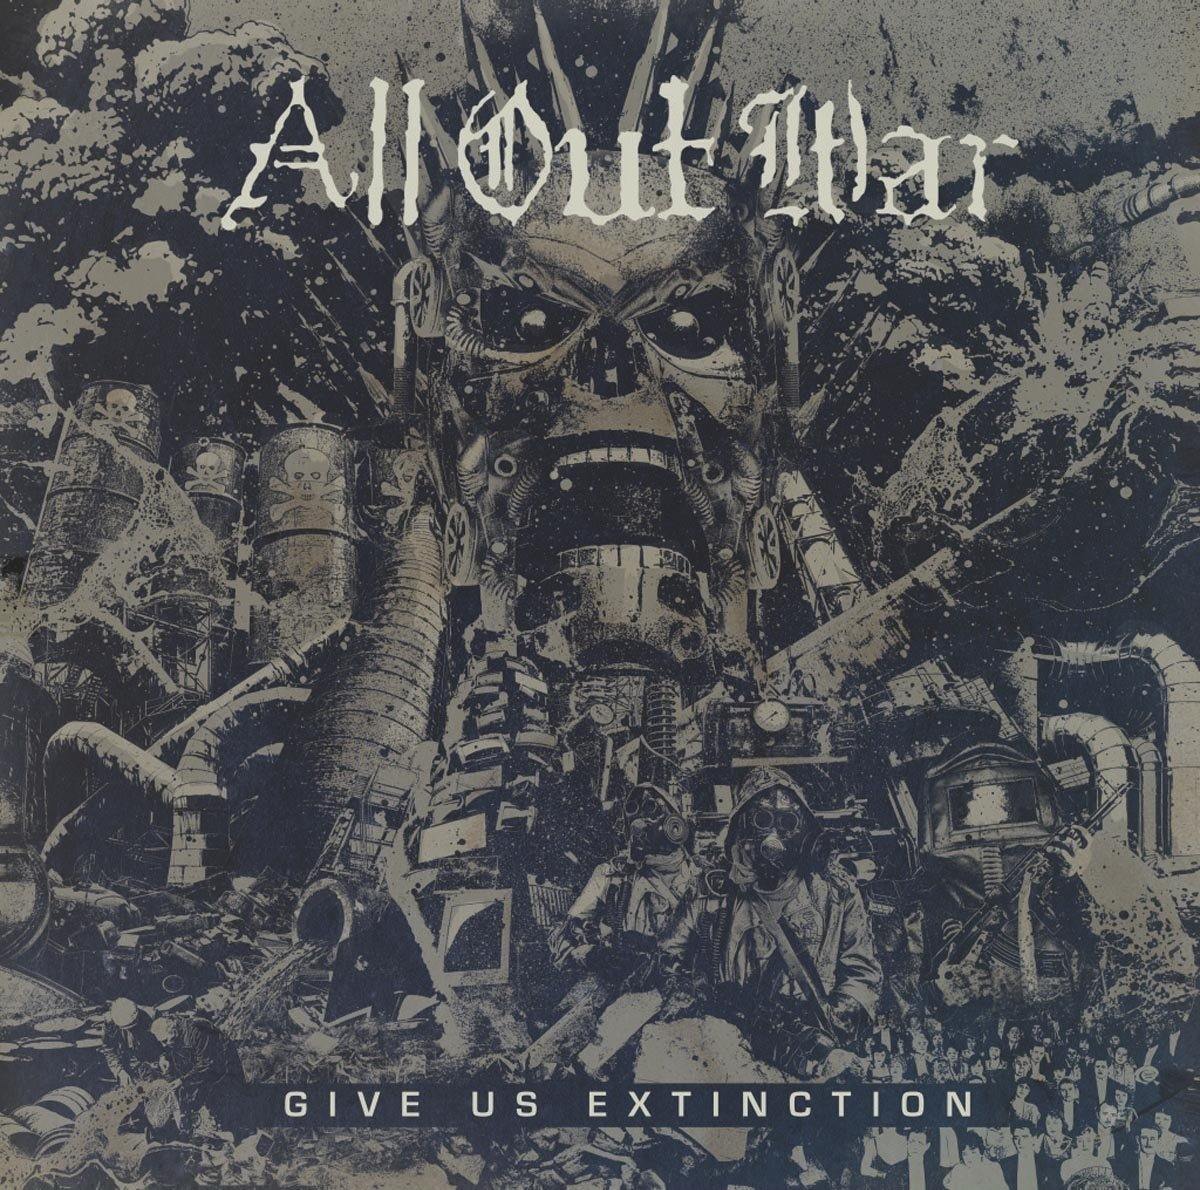 Buy – All Out War "Give Us Extinction" 12" – Band & Music Merch – Cold Cuts Merch